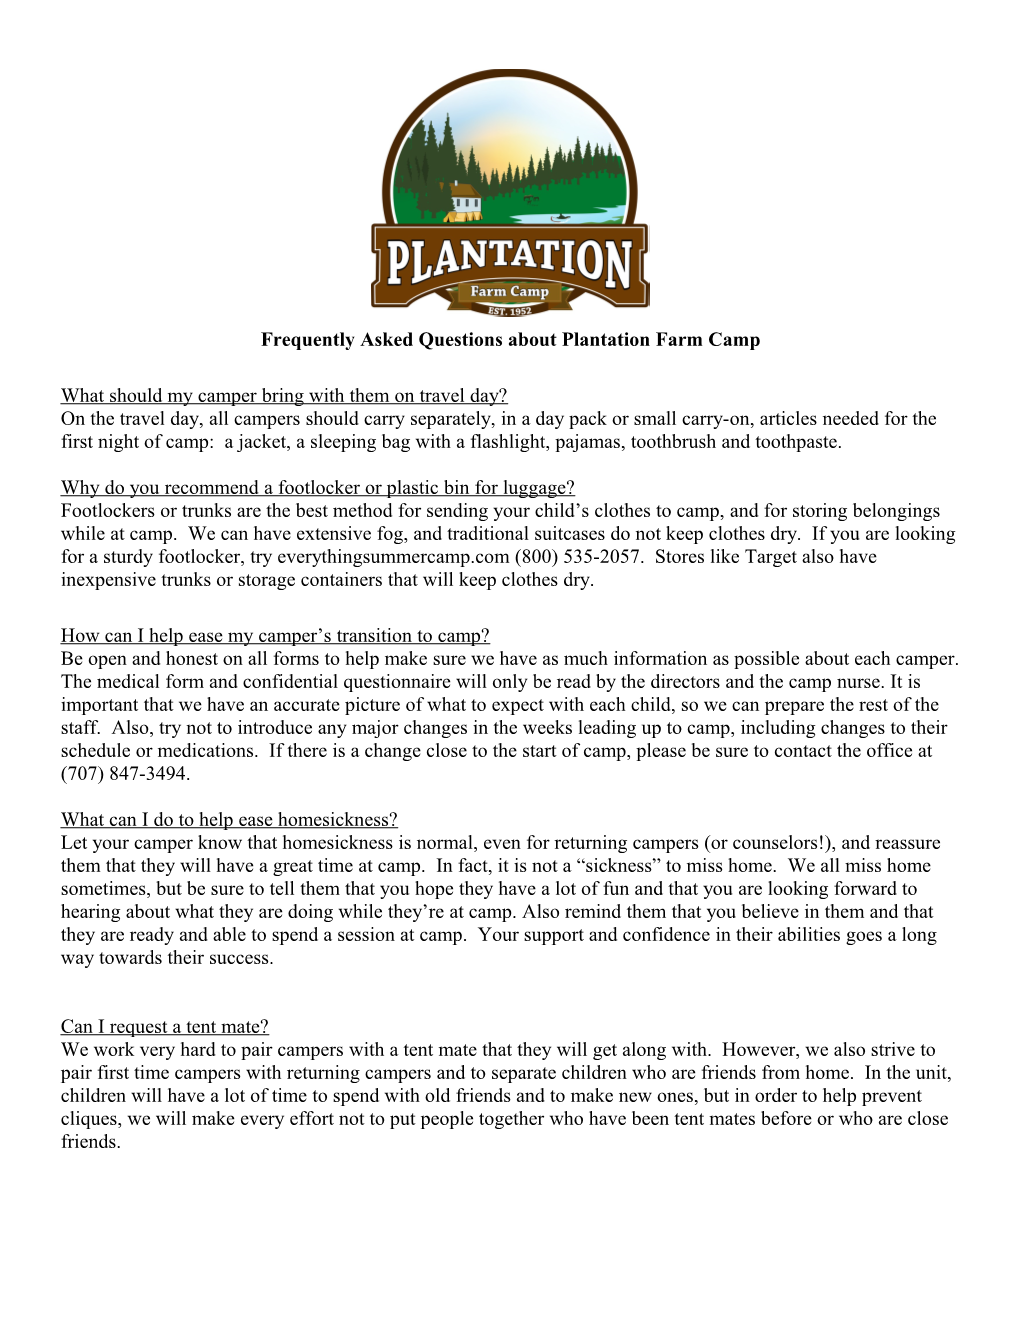 Frequently Asked Questions About Plantation Farm Camp